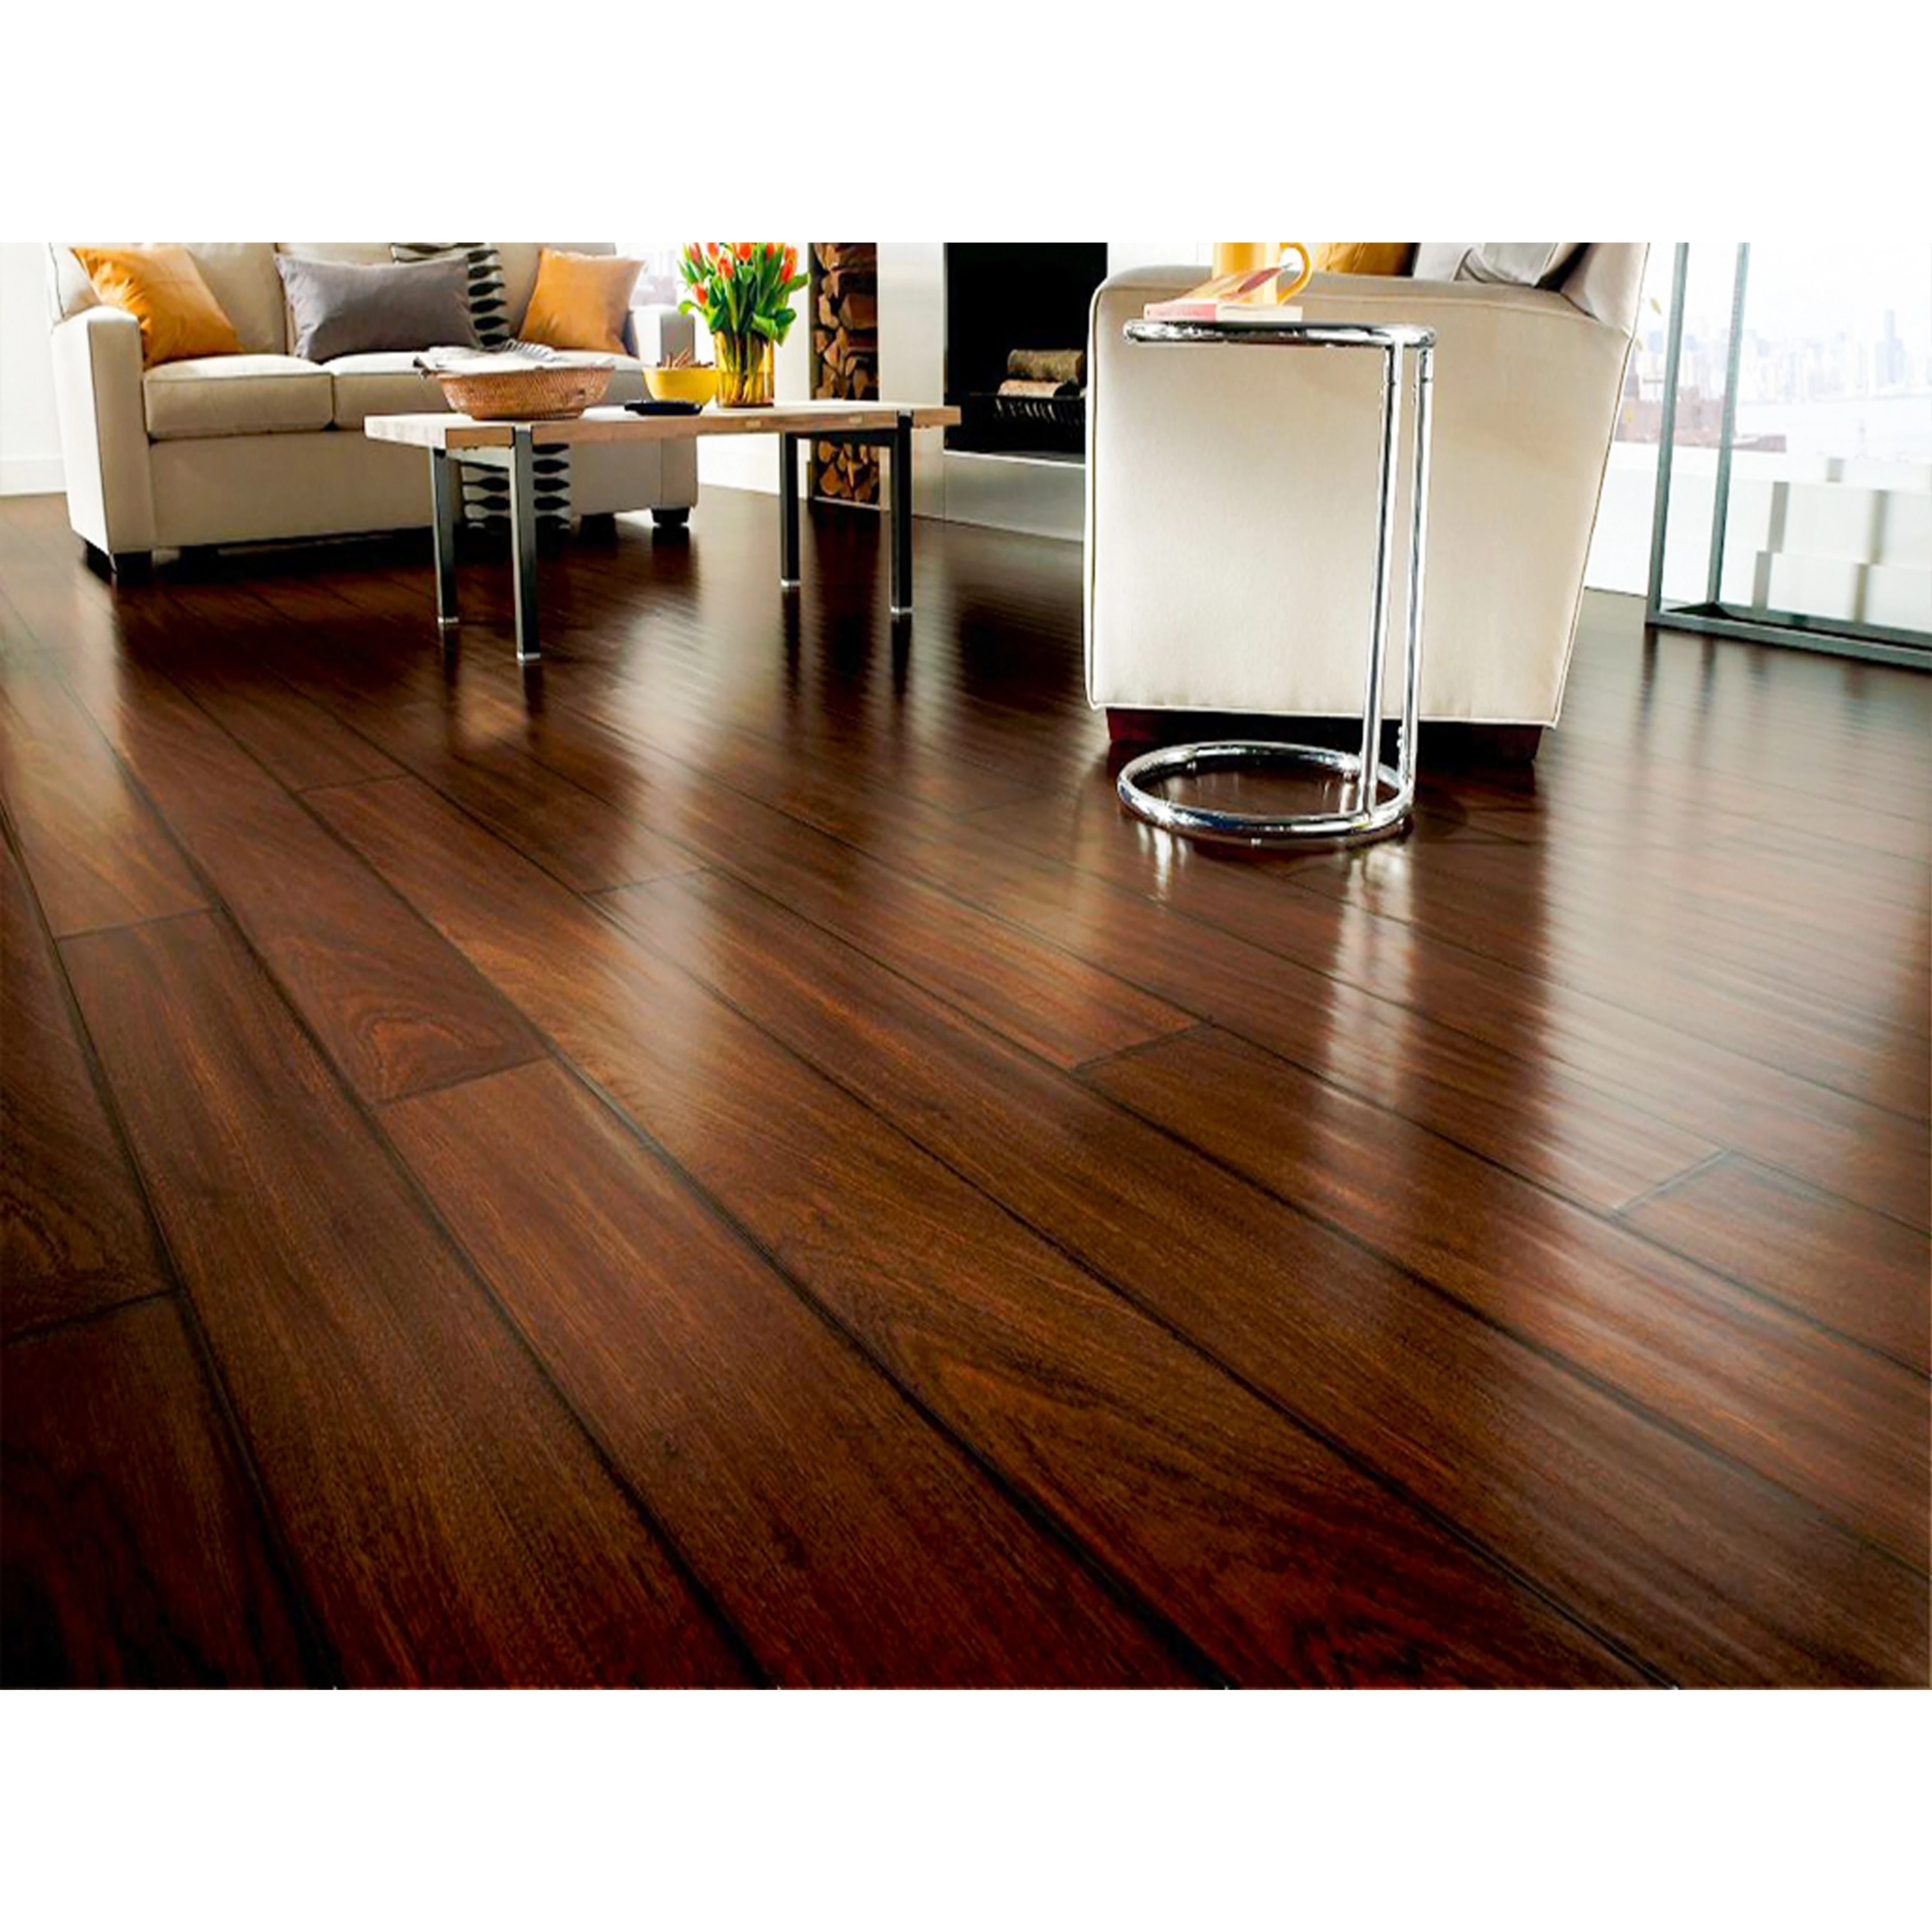 Top Quality Wood Laminate Flooring From Turkey With Best Price